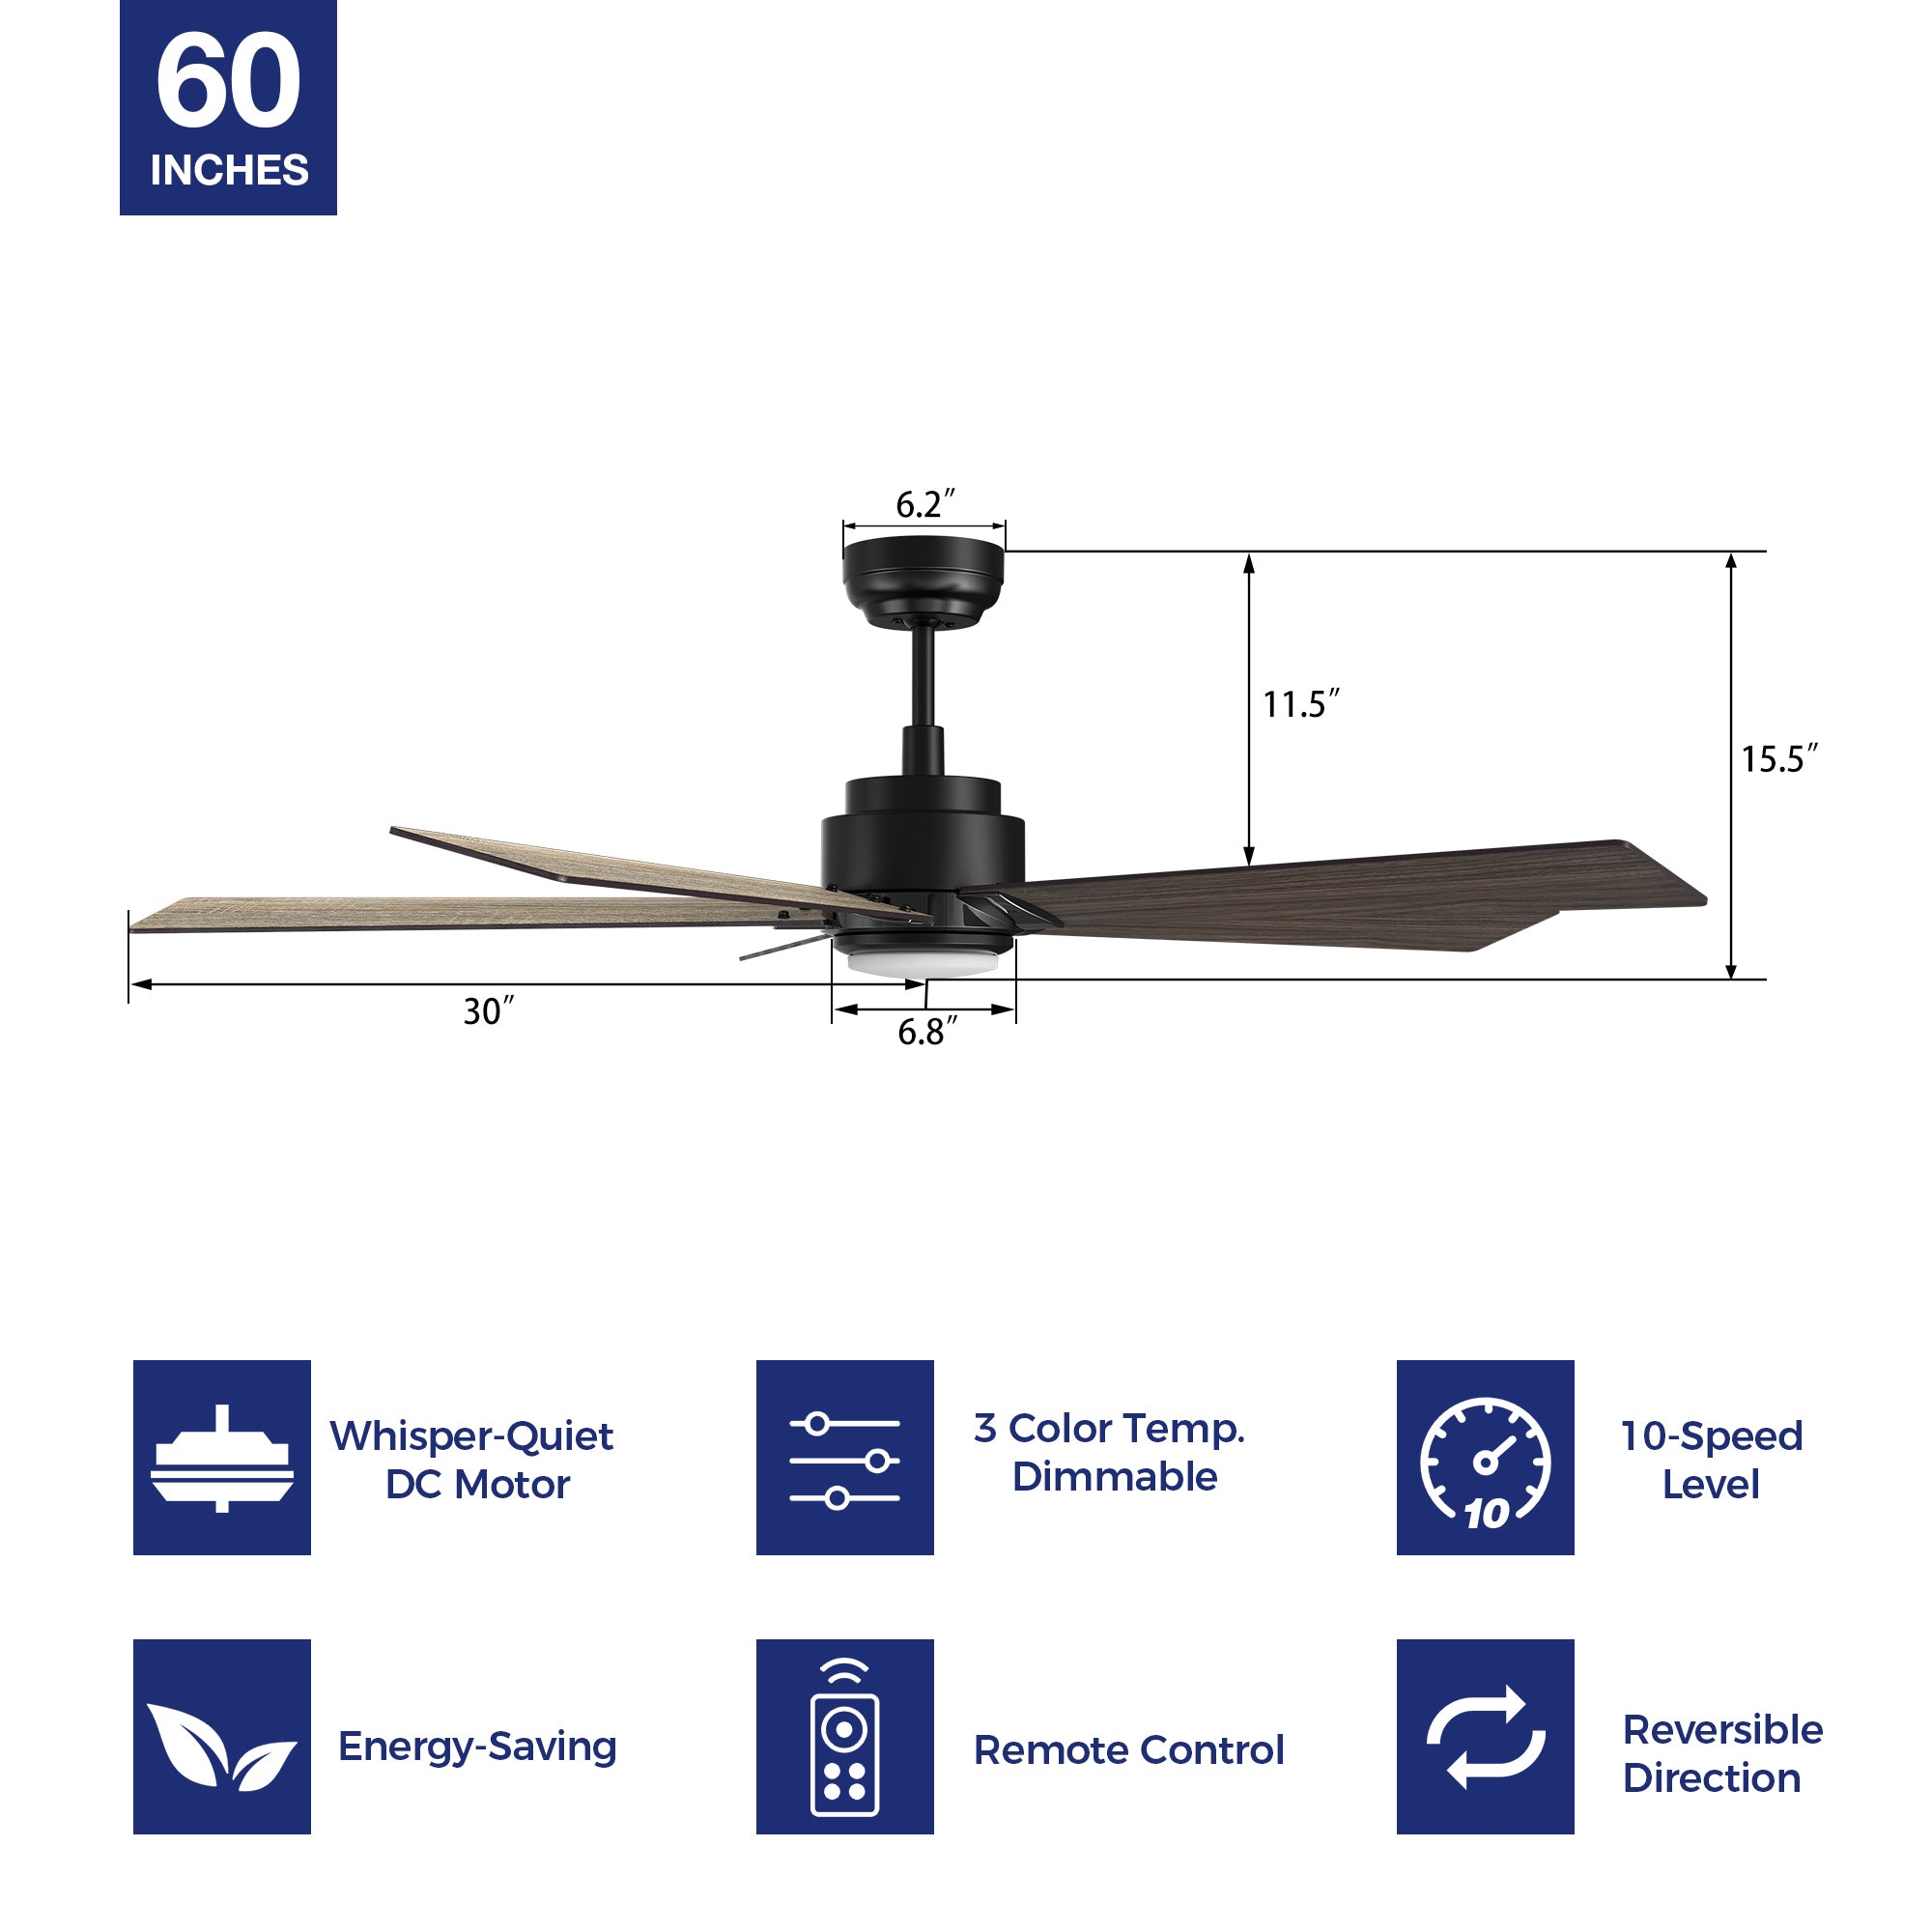 Detail size of Carro Kalmar 60 inch remote control ceiling fan with light, designed with a wood finish, elegant Plywood blades. 